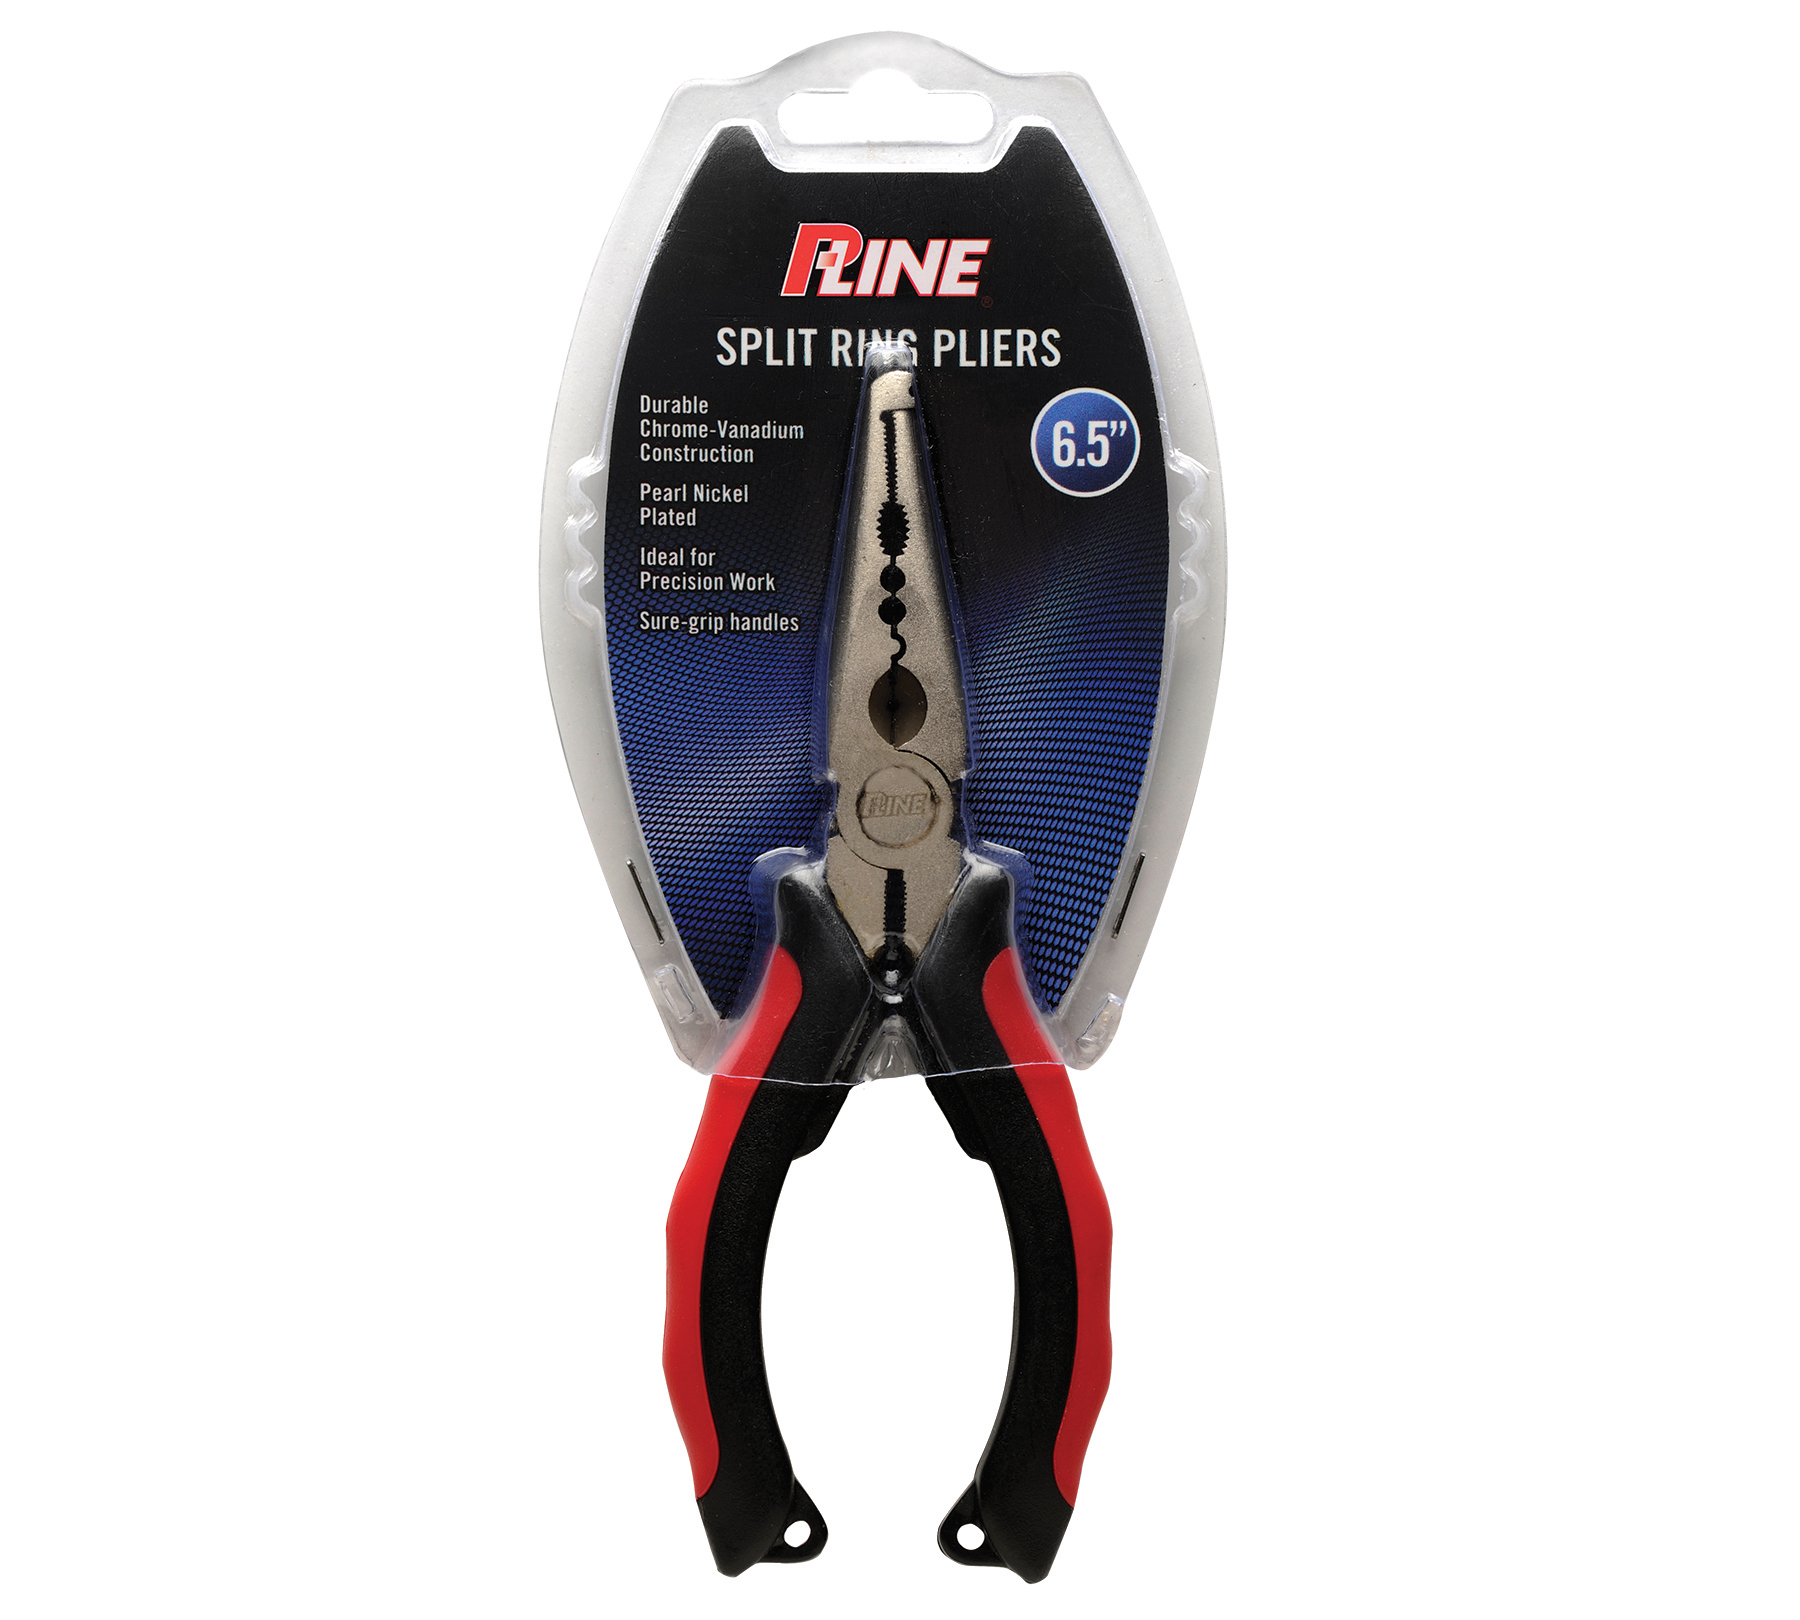 P-line Stainless Steel Long-Nose Pliers